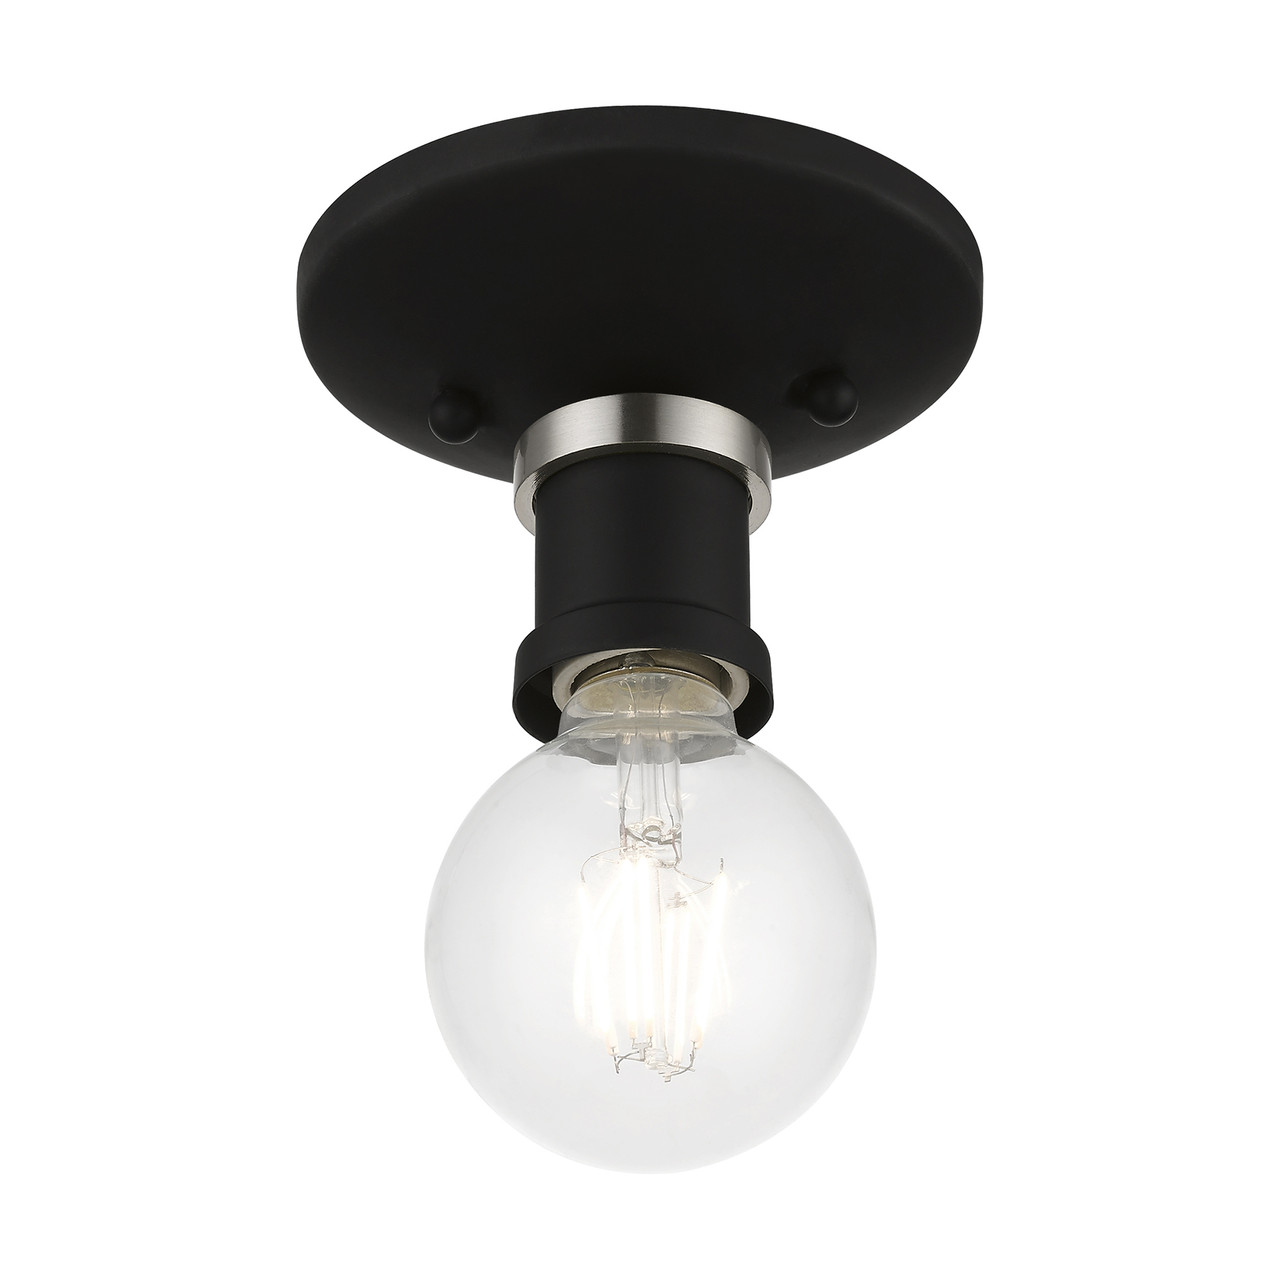 LIVEX LIGHTING 47160-04 1 Light Black with Brushed Nickel Accents Single Flush Mount